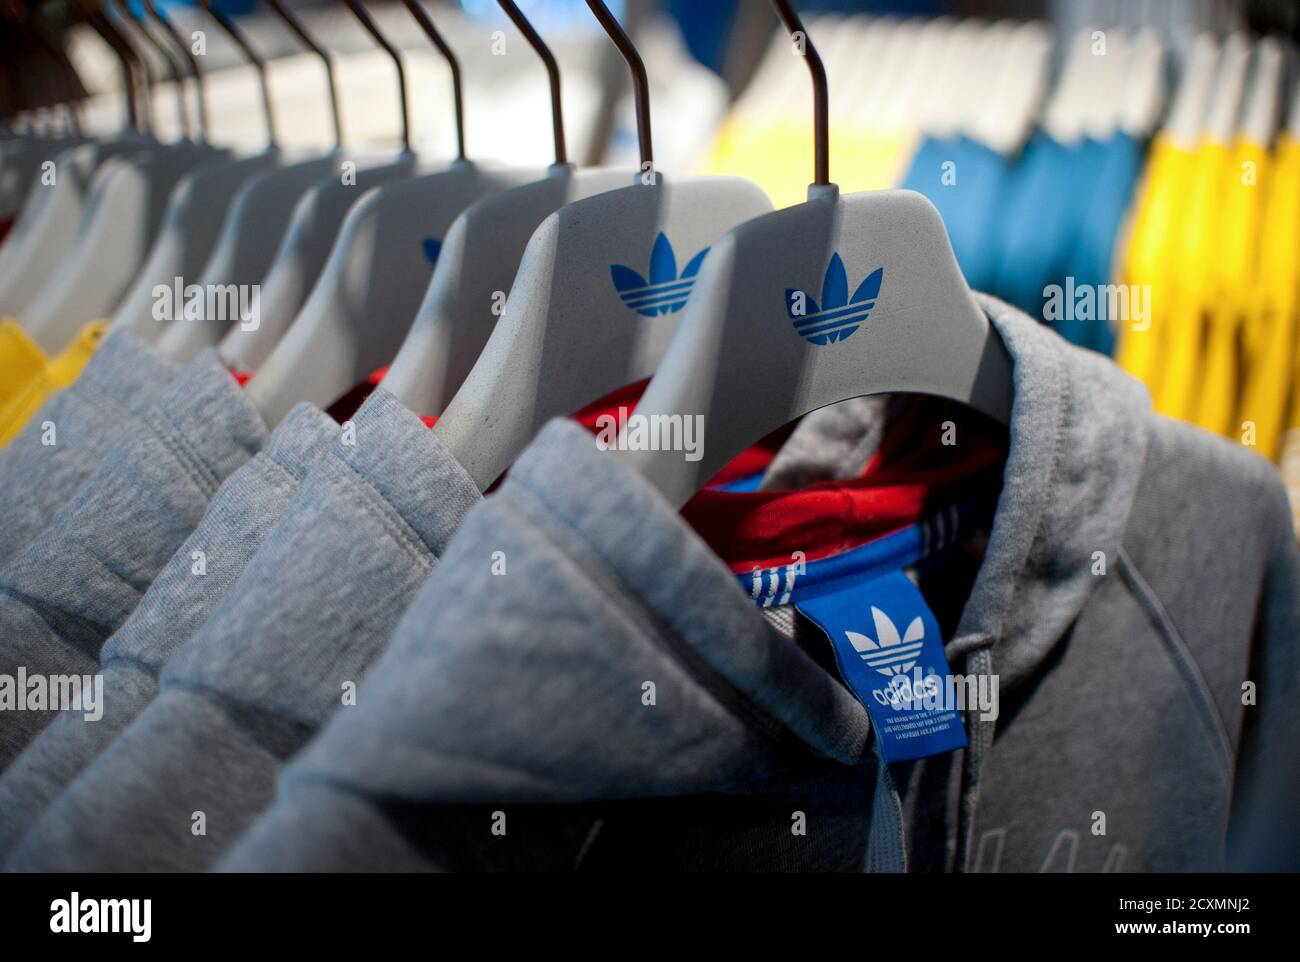 Clothes are pictured in the new Adidas Originals store before the opening in Berlin, March 27, 2014. Adidas has launched a new store blueprint for its fashion brand with a Wi-Fi